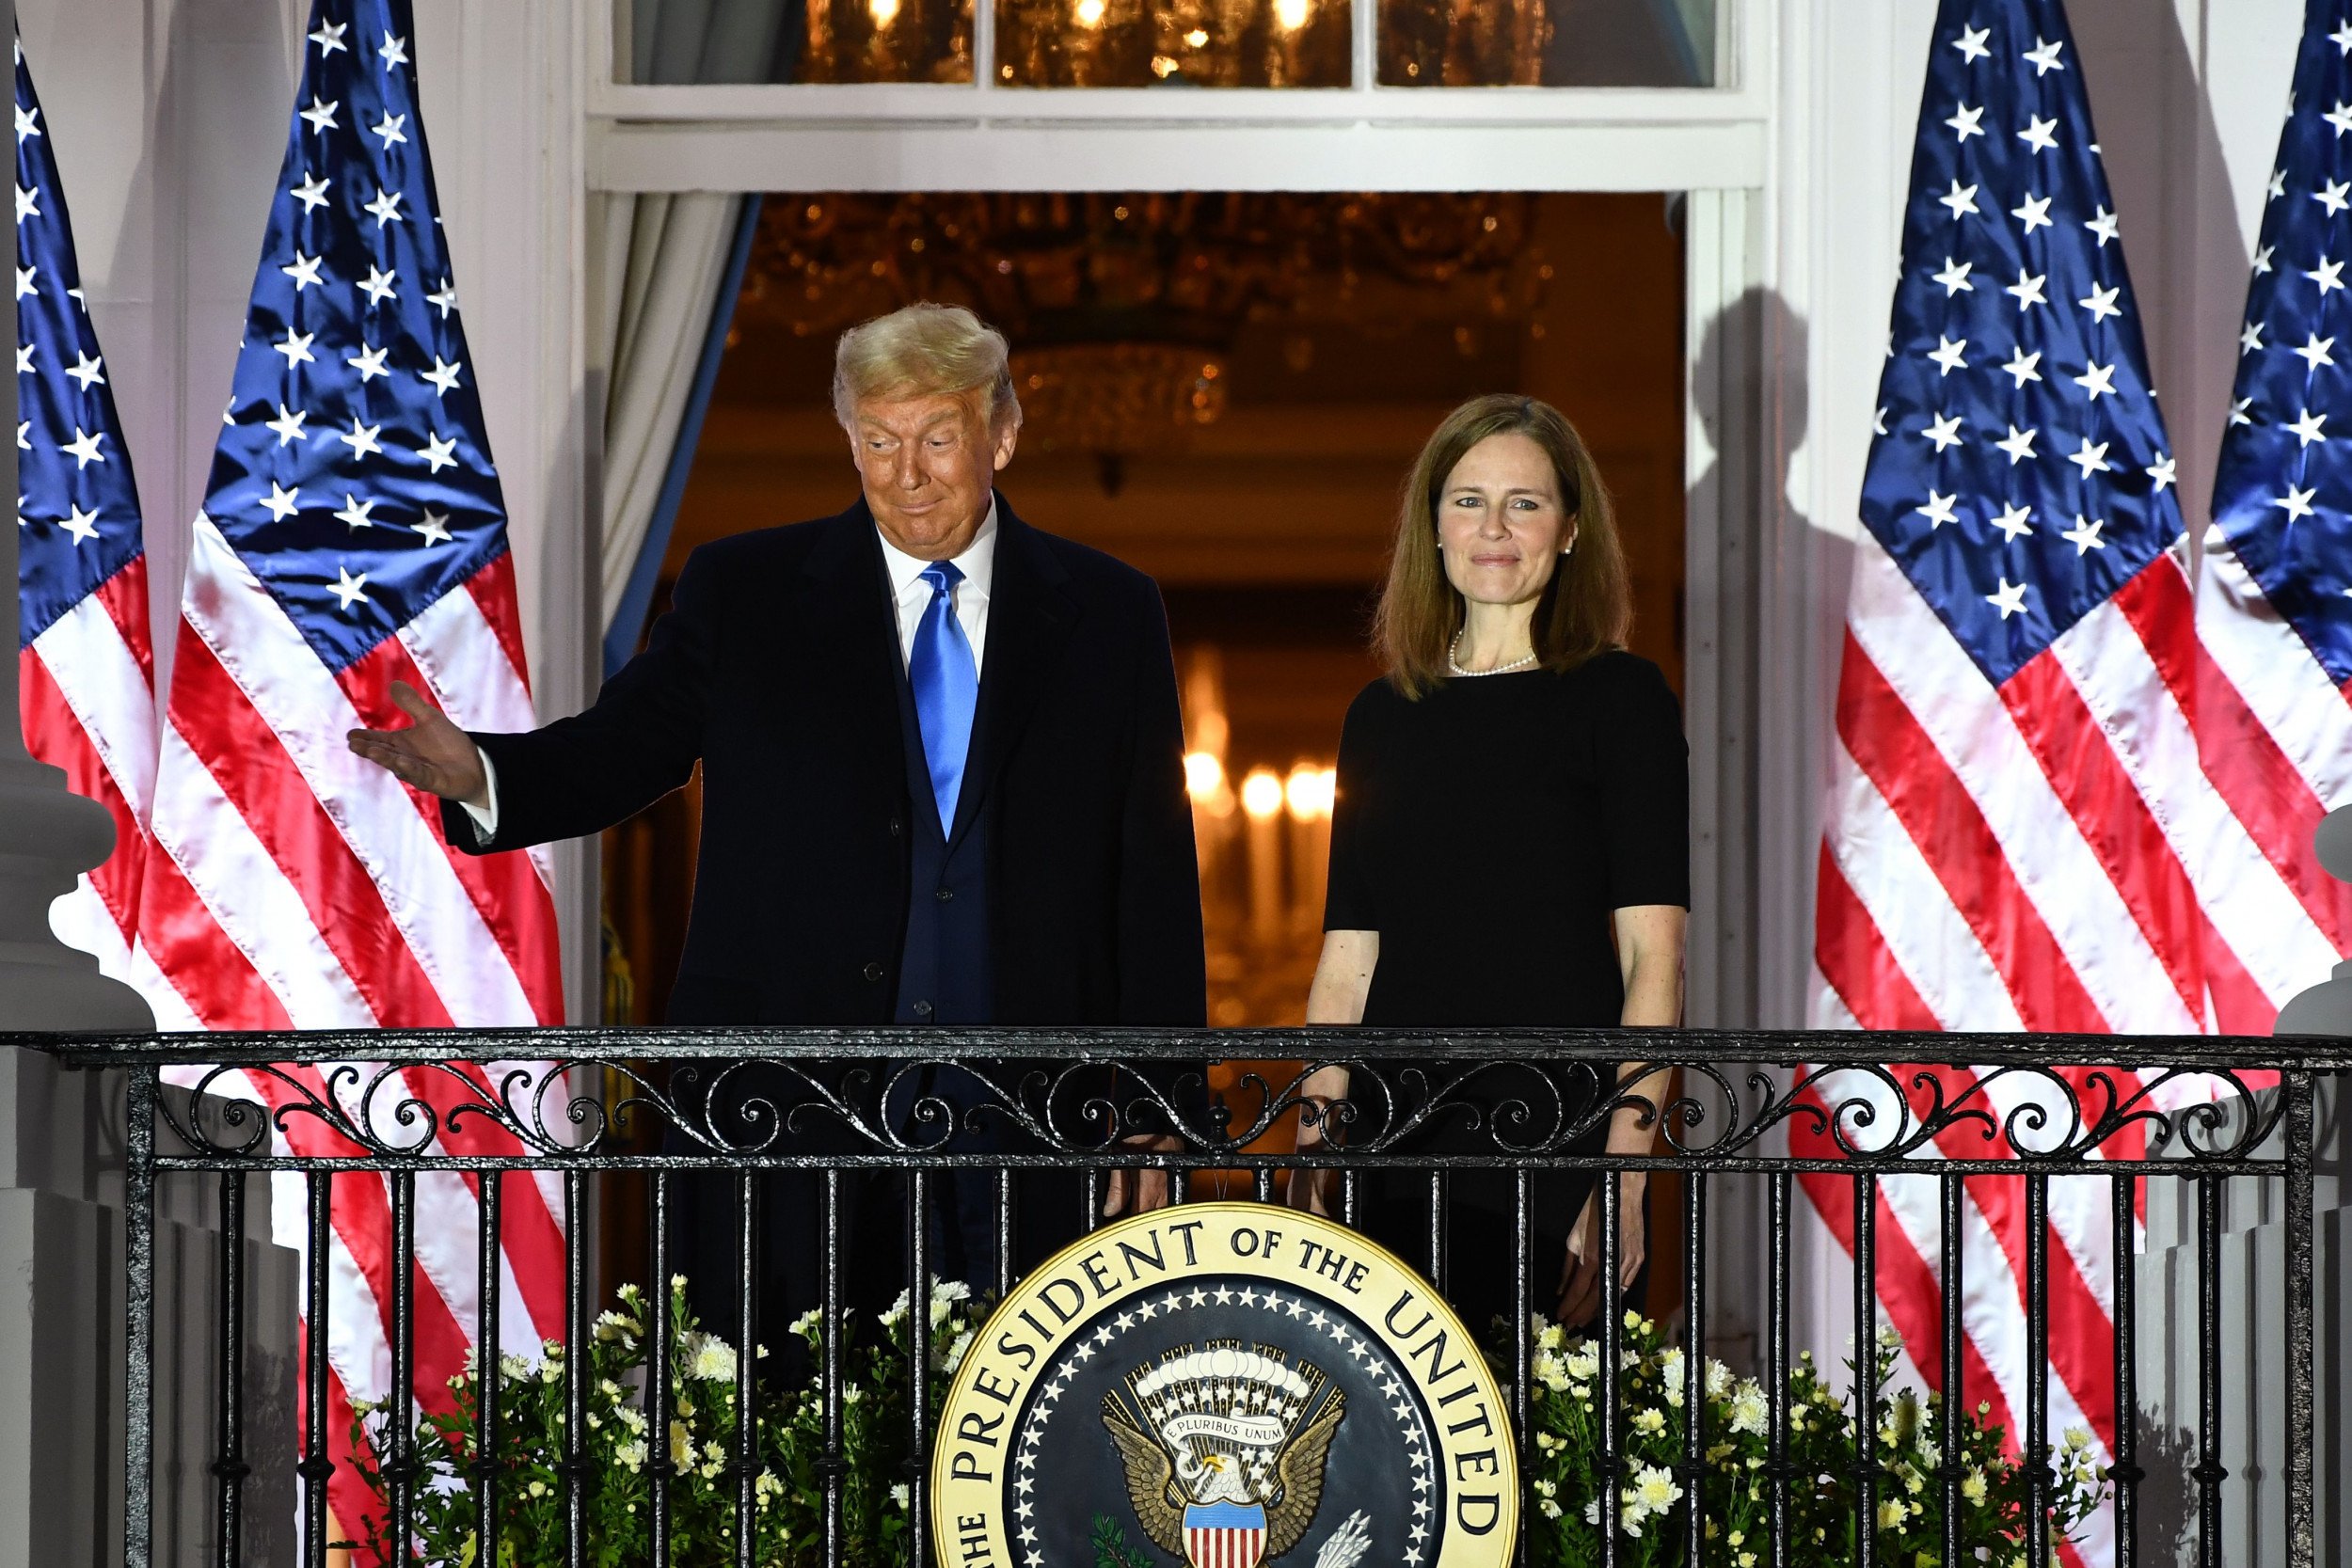 Who Is Amy Coney Barrett, New Supreme Court Justice Nominated By Trump To Replace Late Justice RBG